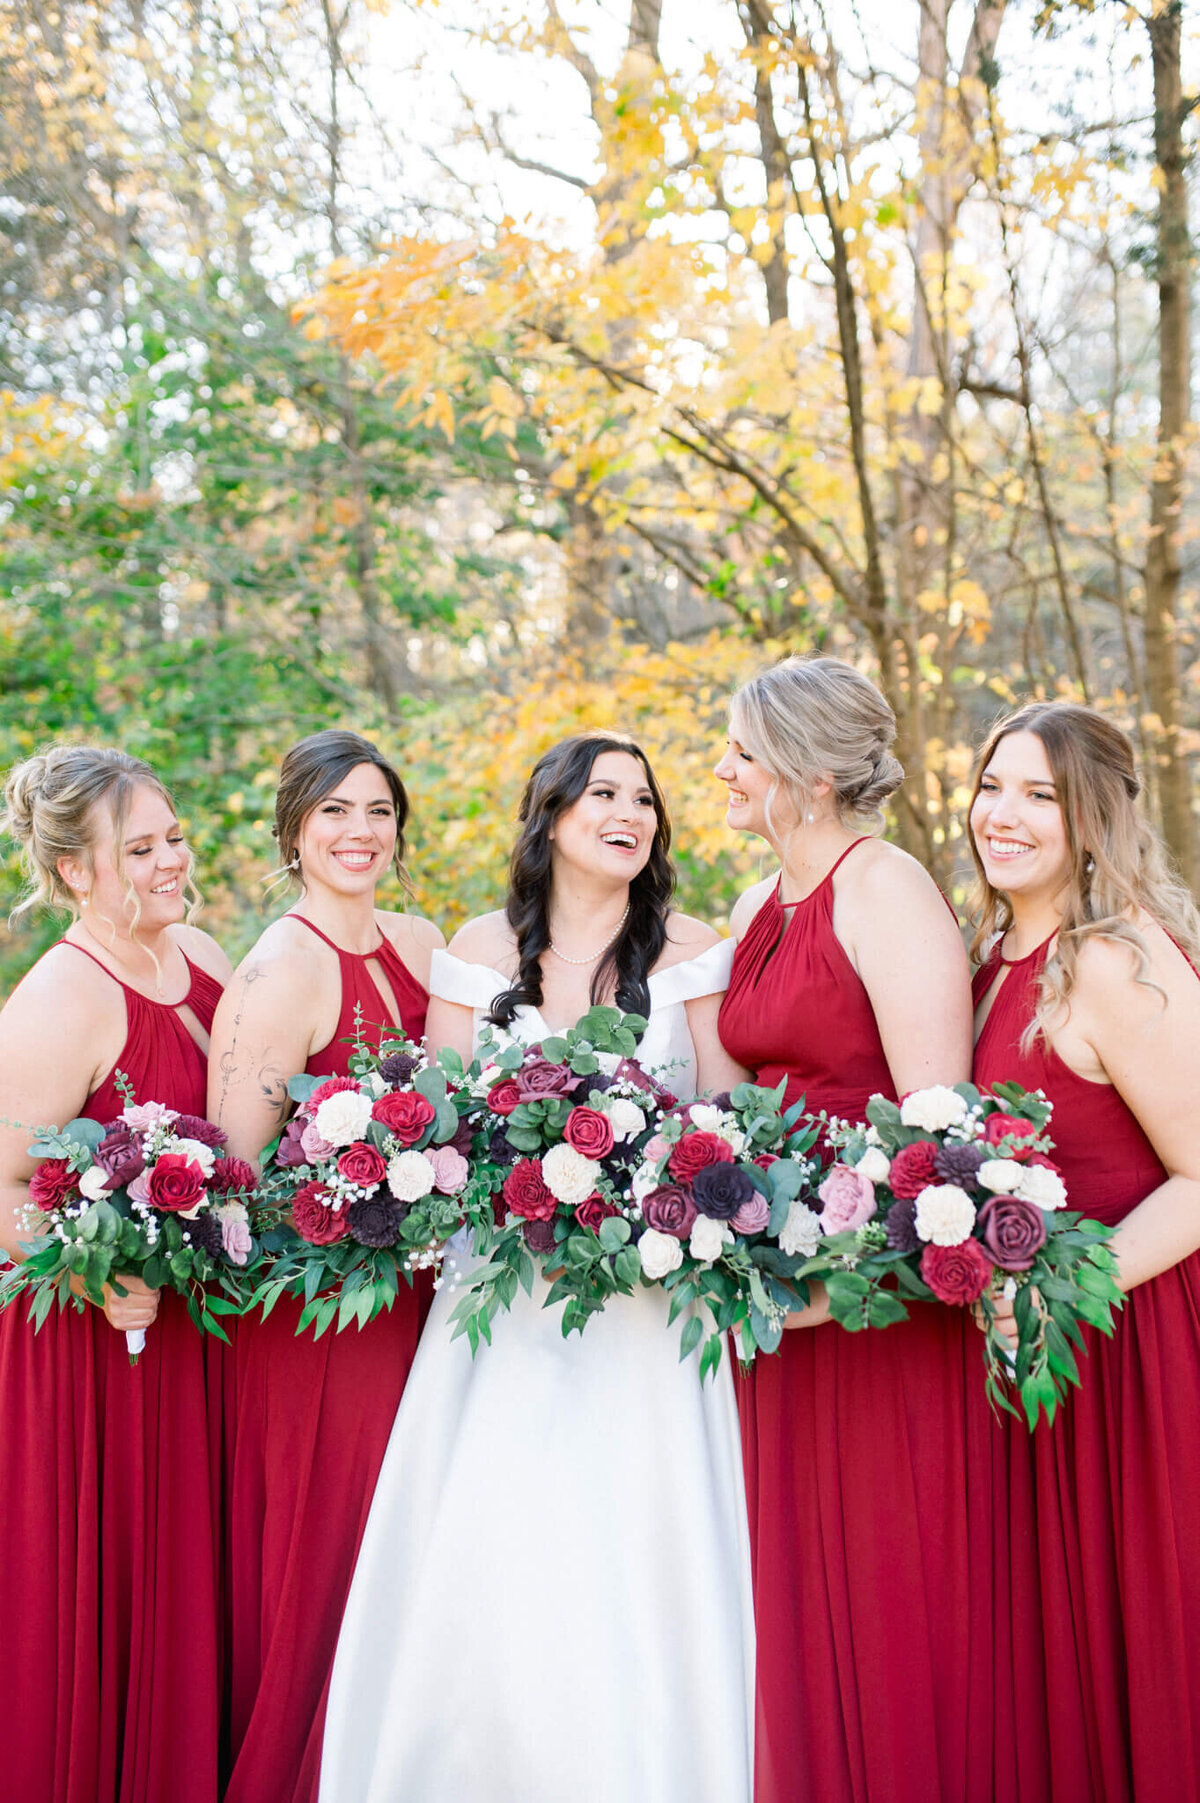 Bridesmaids laughing with the bride for her Toronto wedding